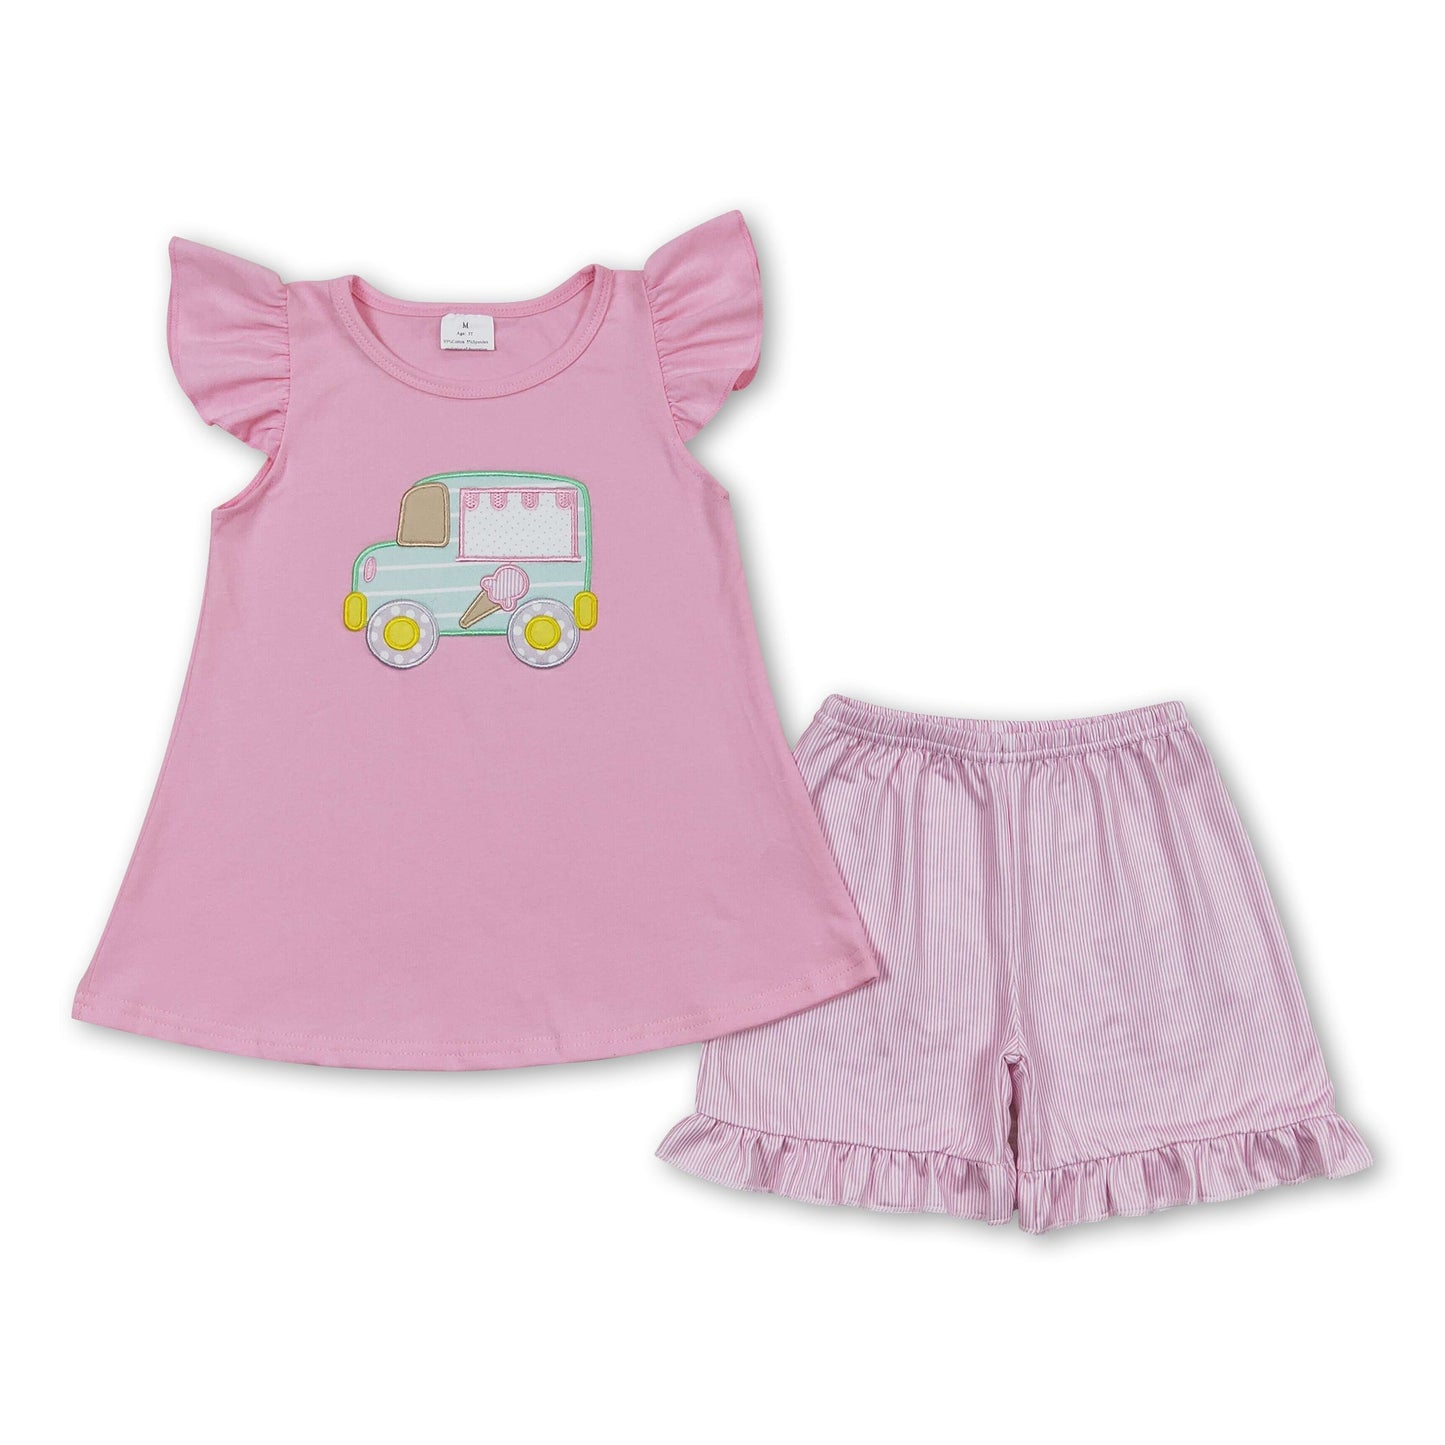 Pink ice cream top ruffle shorts girls summer clothes